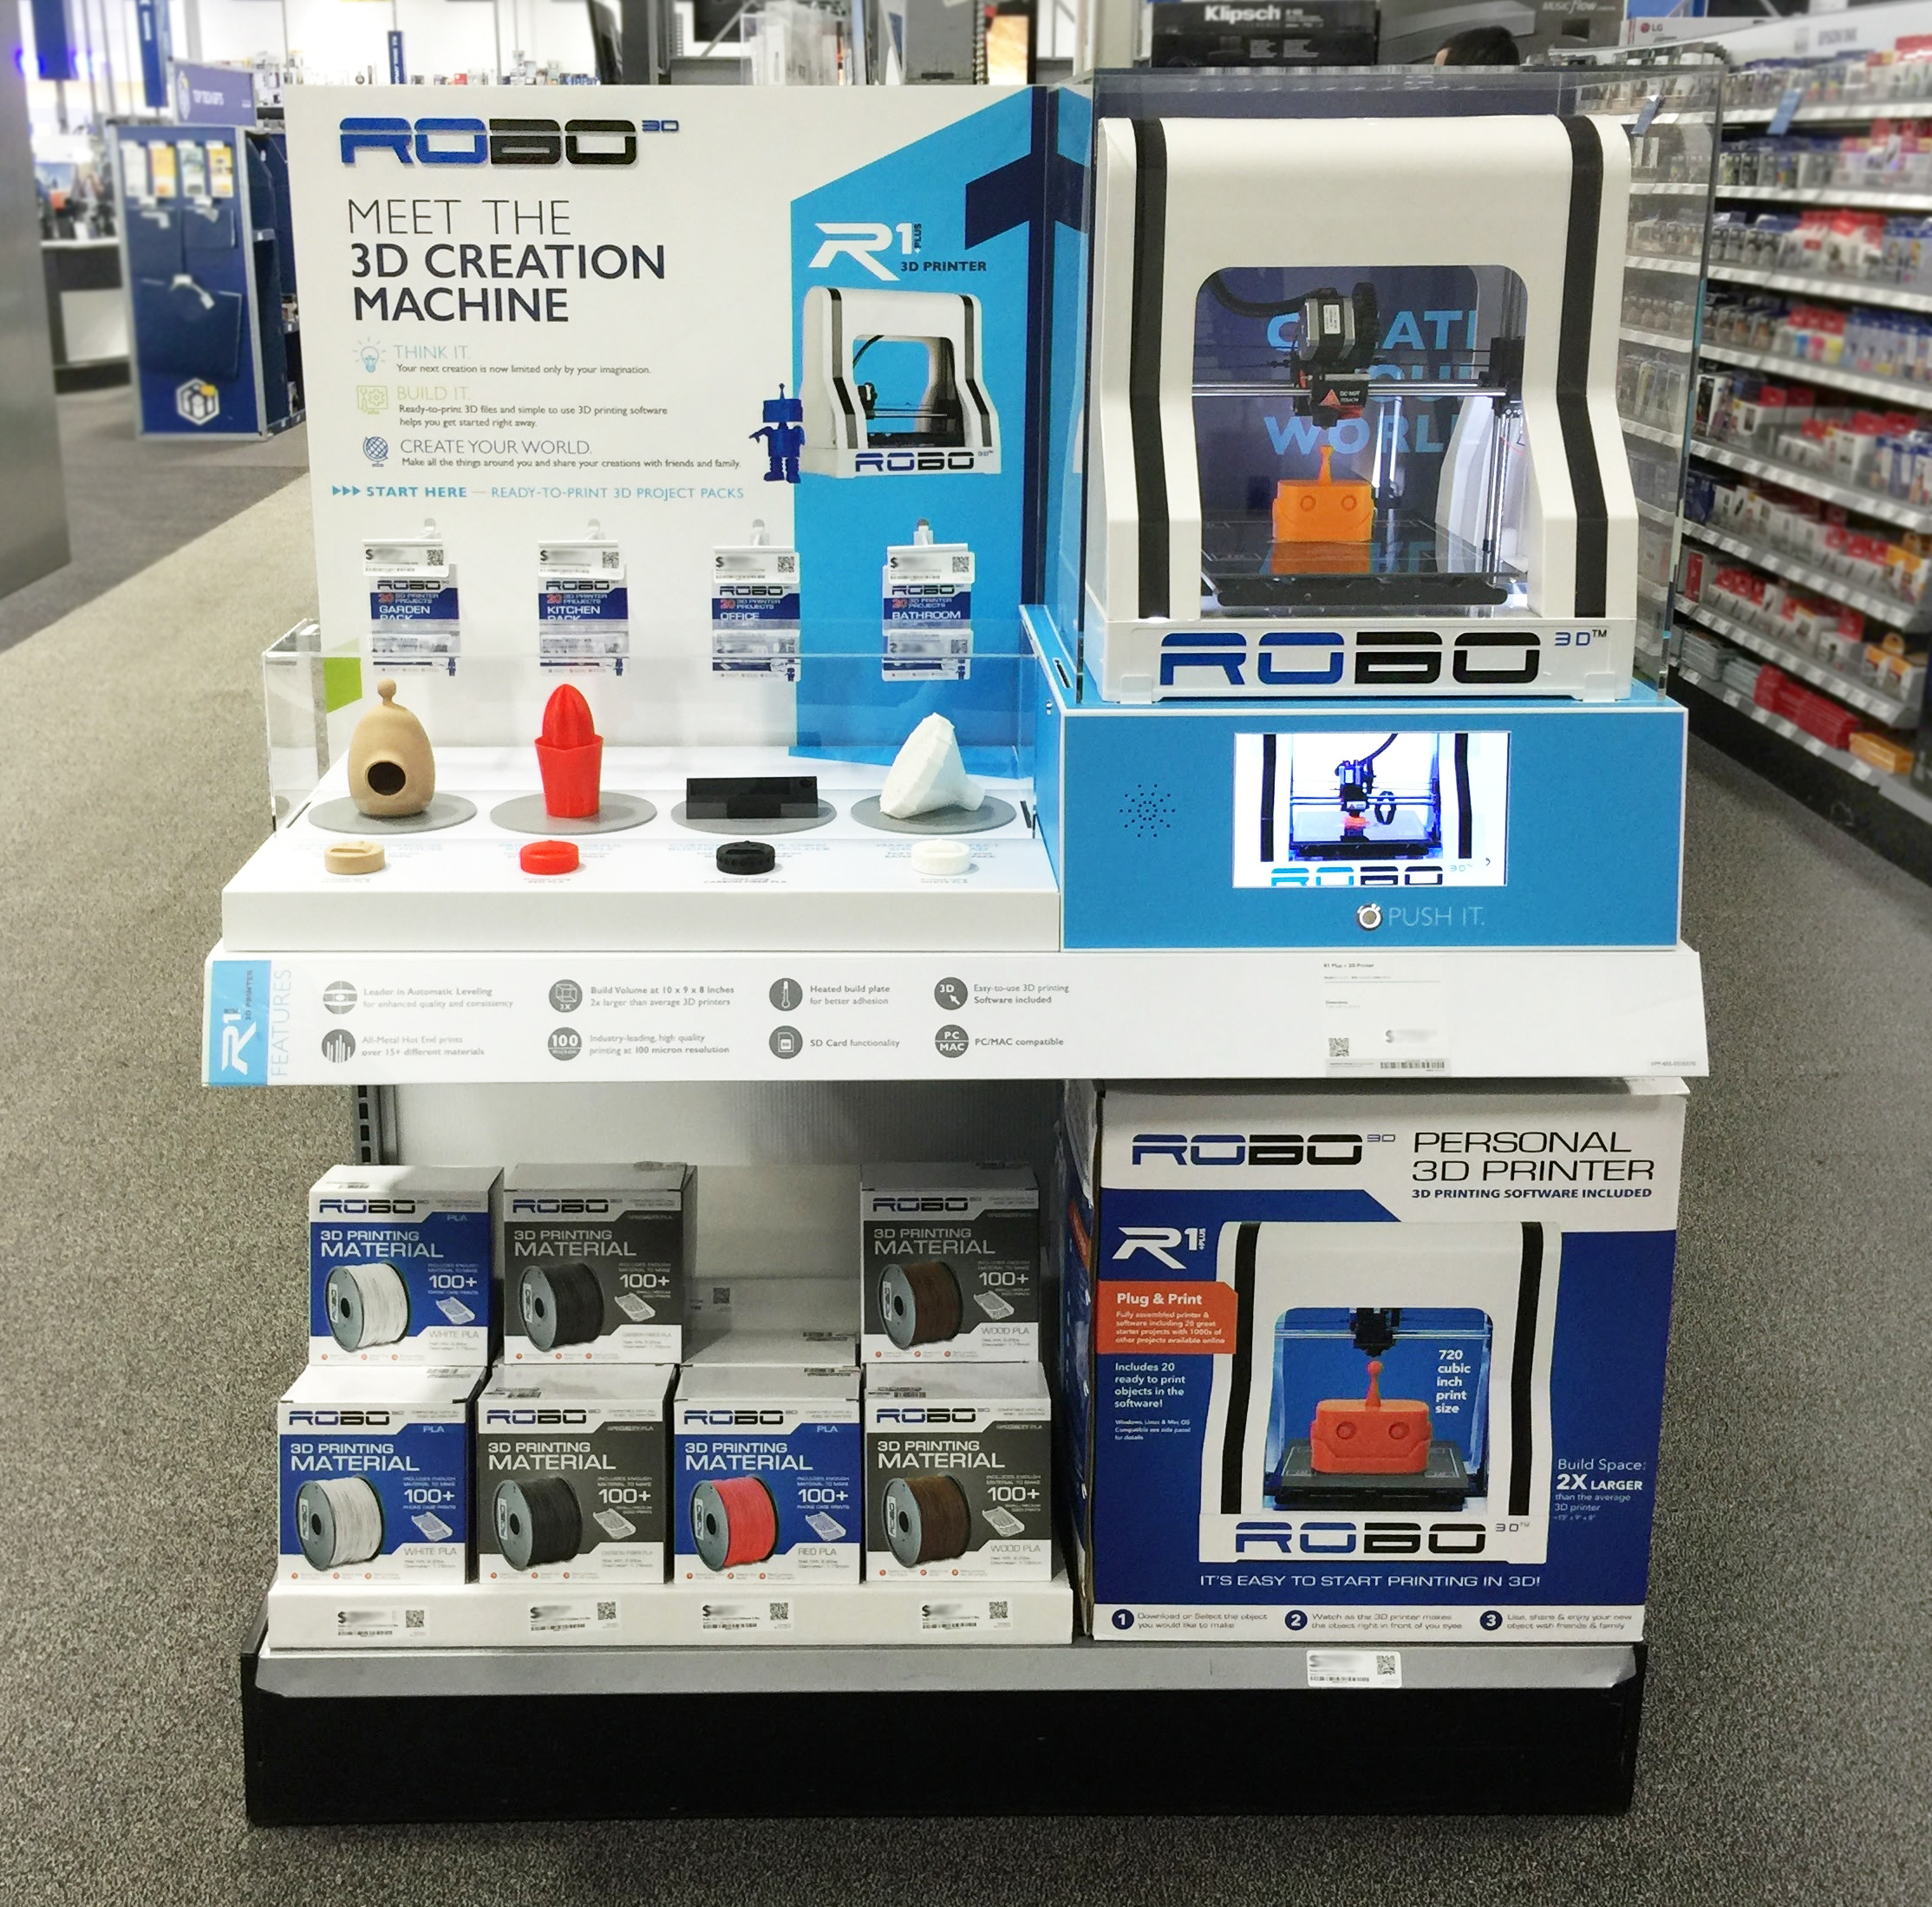 ROBO 3D introduces new personal 3D printers at Best Buy locations – Visual Merchandising and Store Design